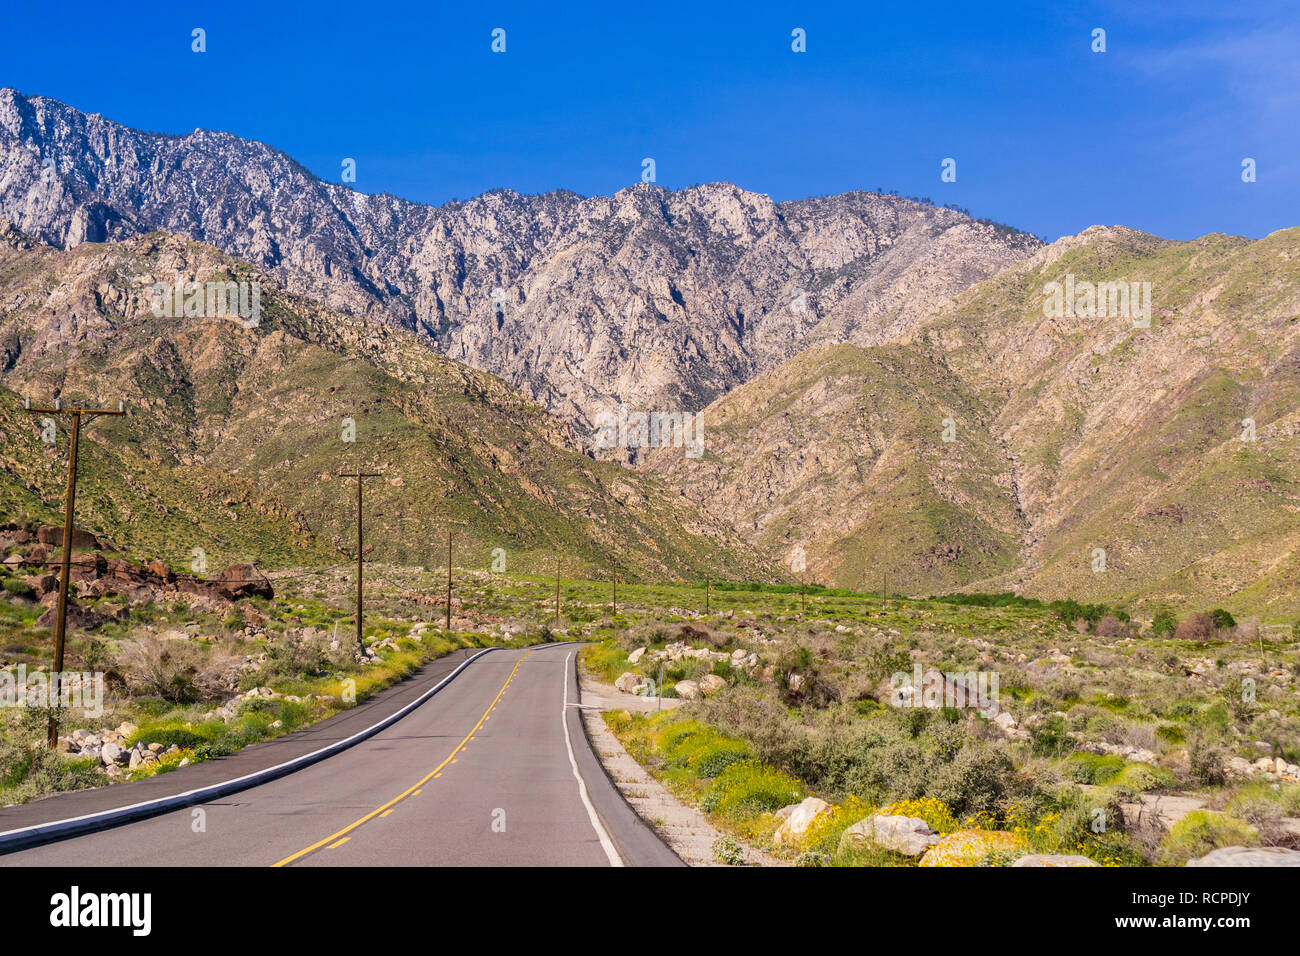 Road leading to the Palm Springs Aerial Tramway, Mount San Jacinto, California Stock Photo